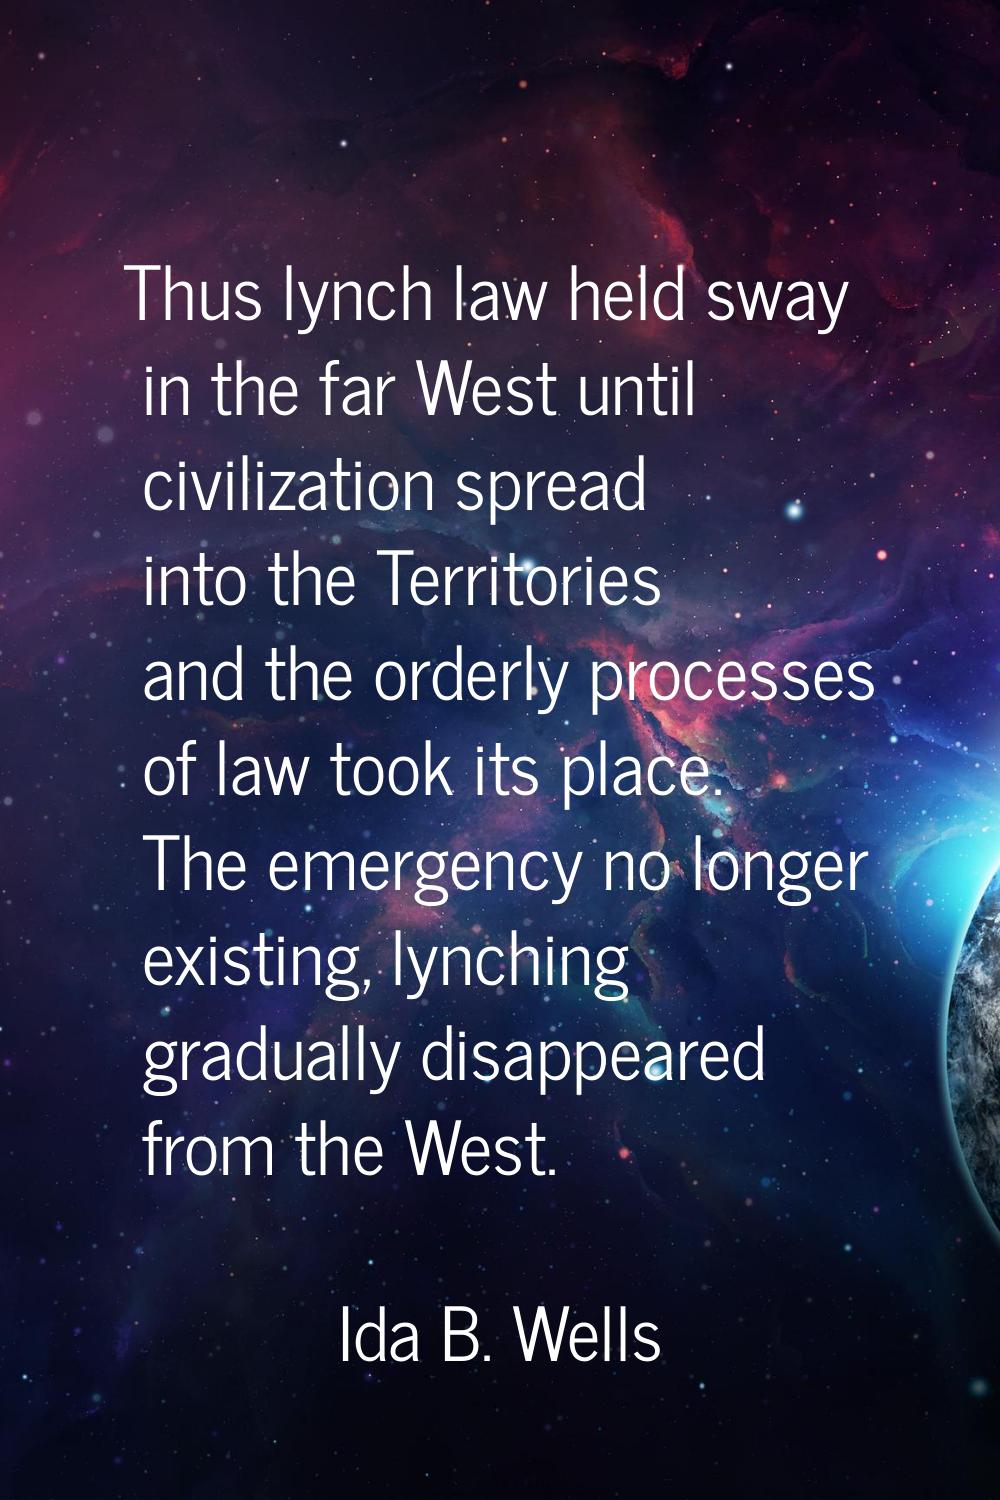 Thus lynch law held sway in the far West until civilization spread into the Territories and the ord